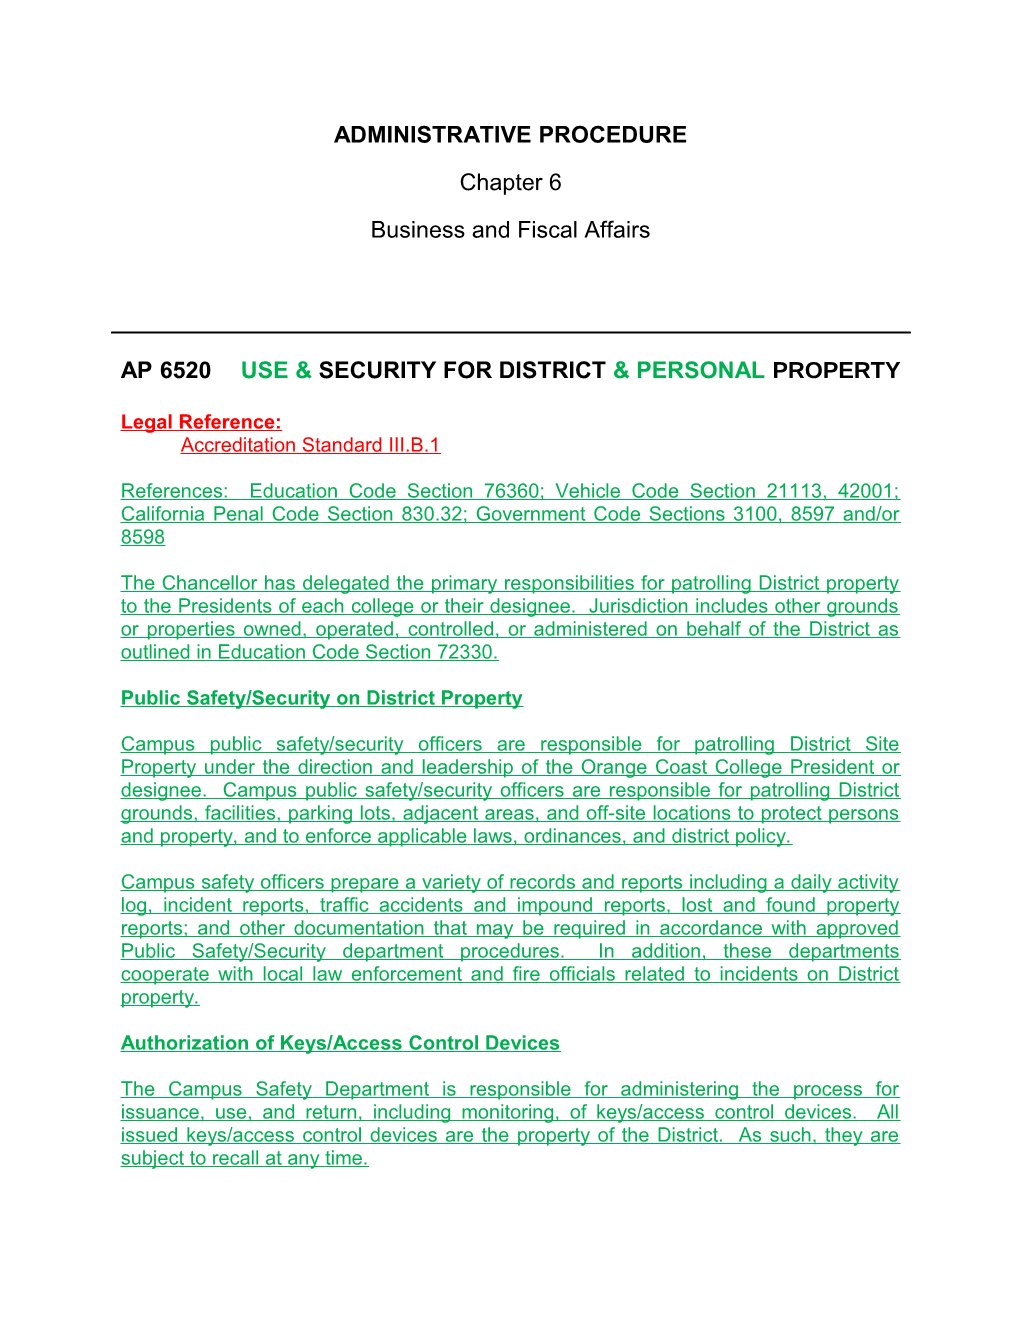 Ap 6520Use & Security for District & Personal Property